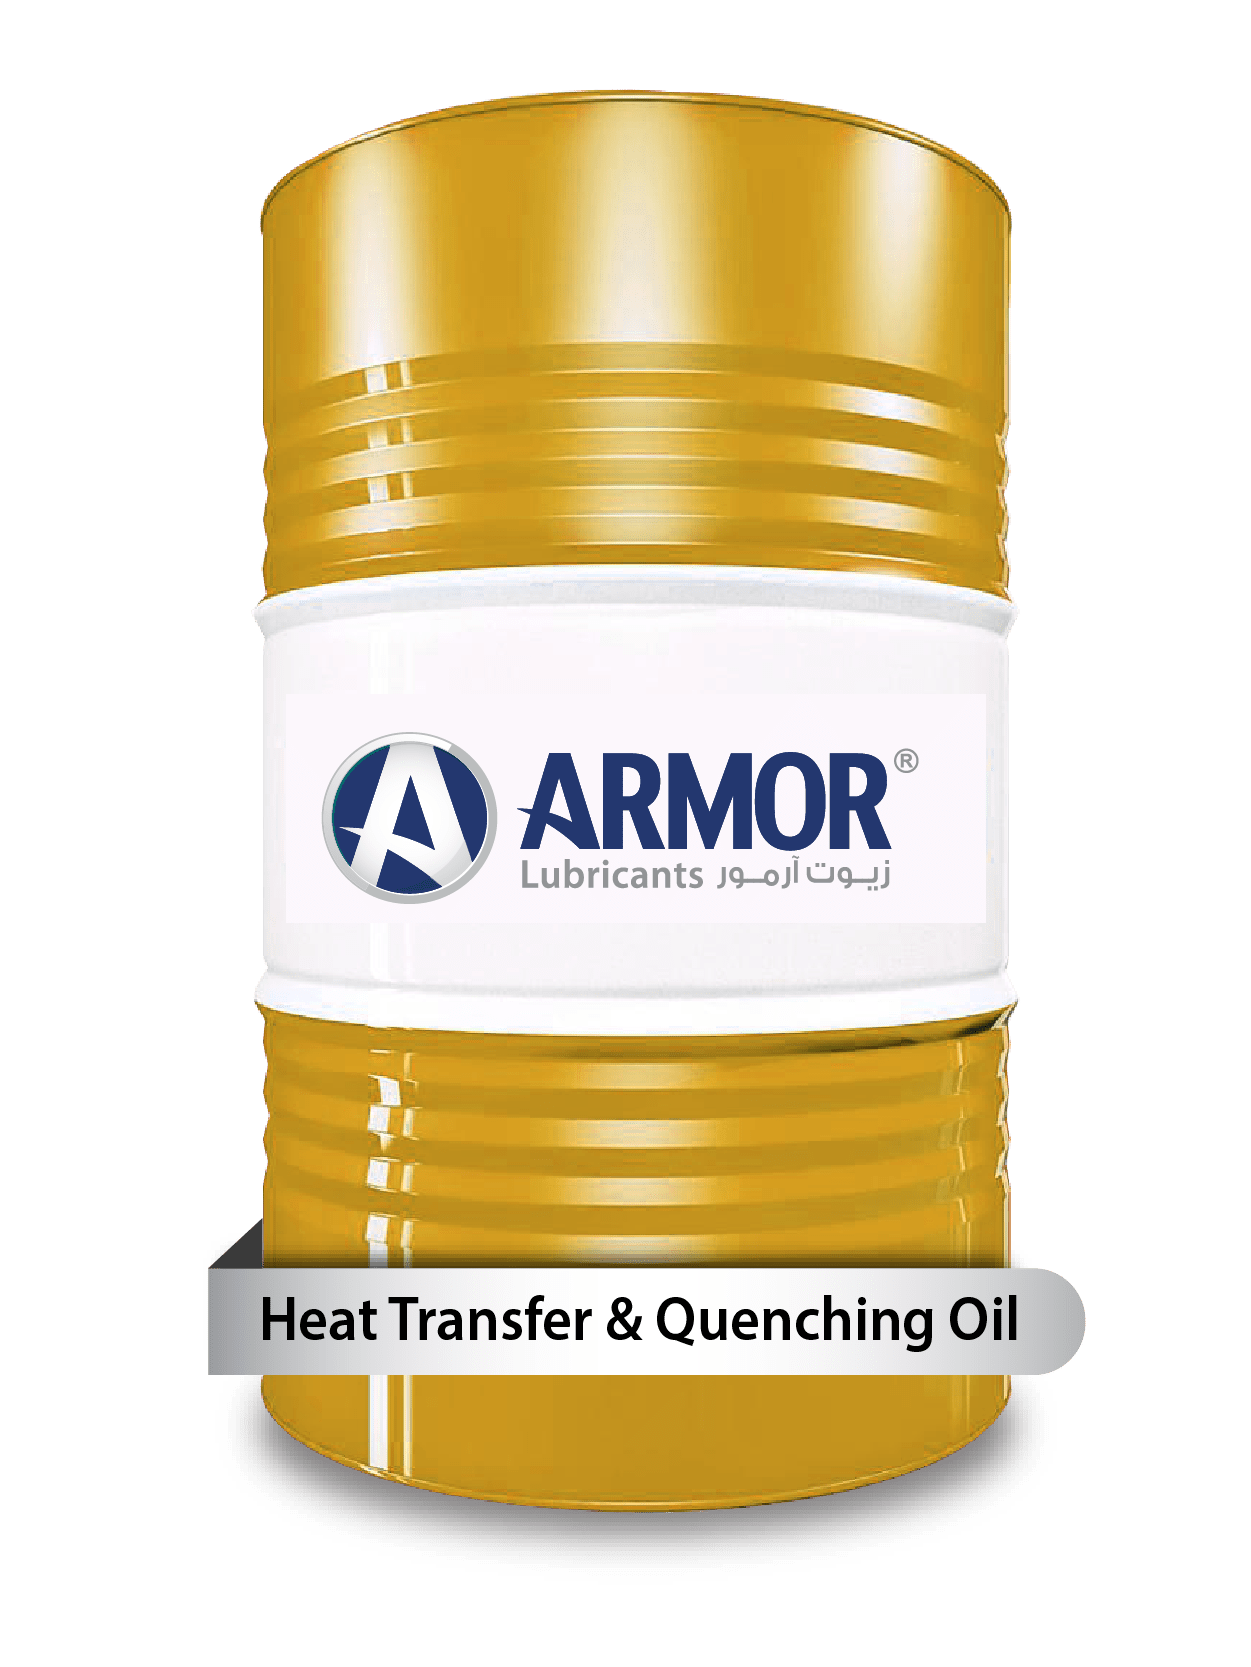 Heat Transfer & Quenching Oil